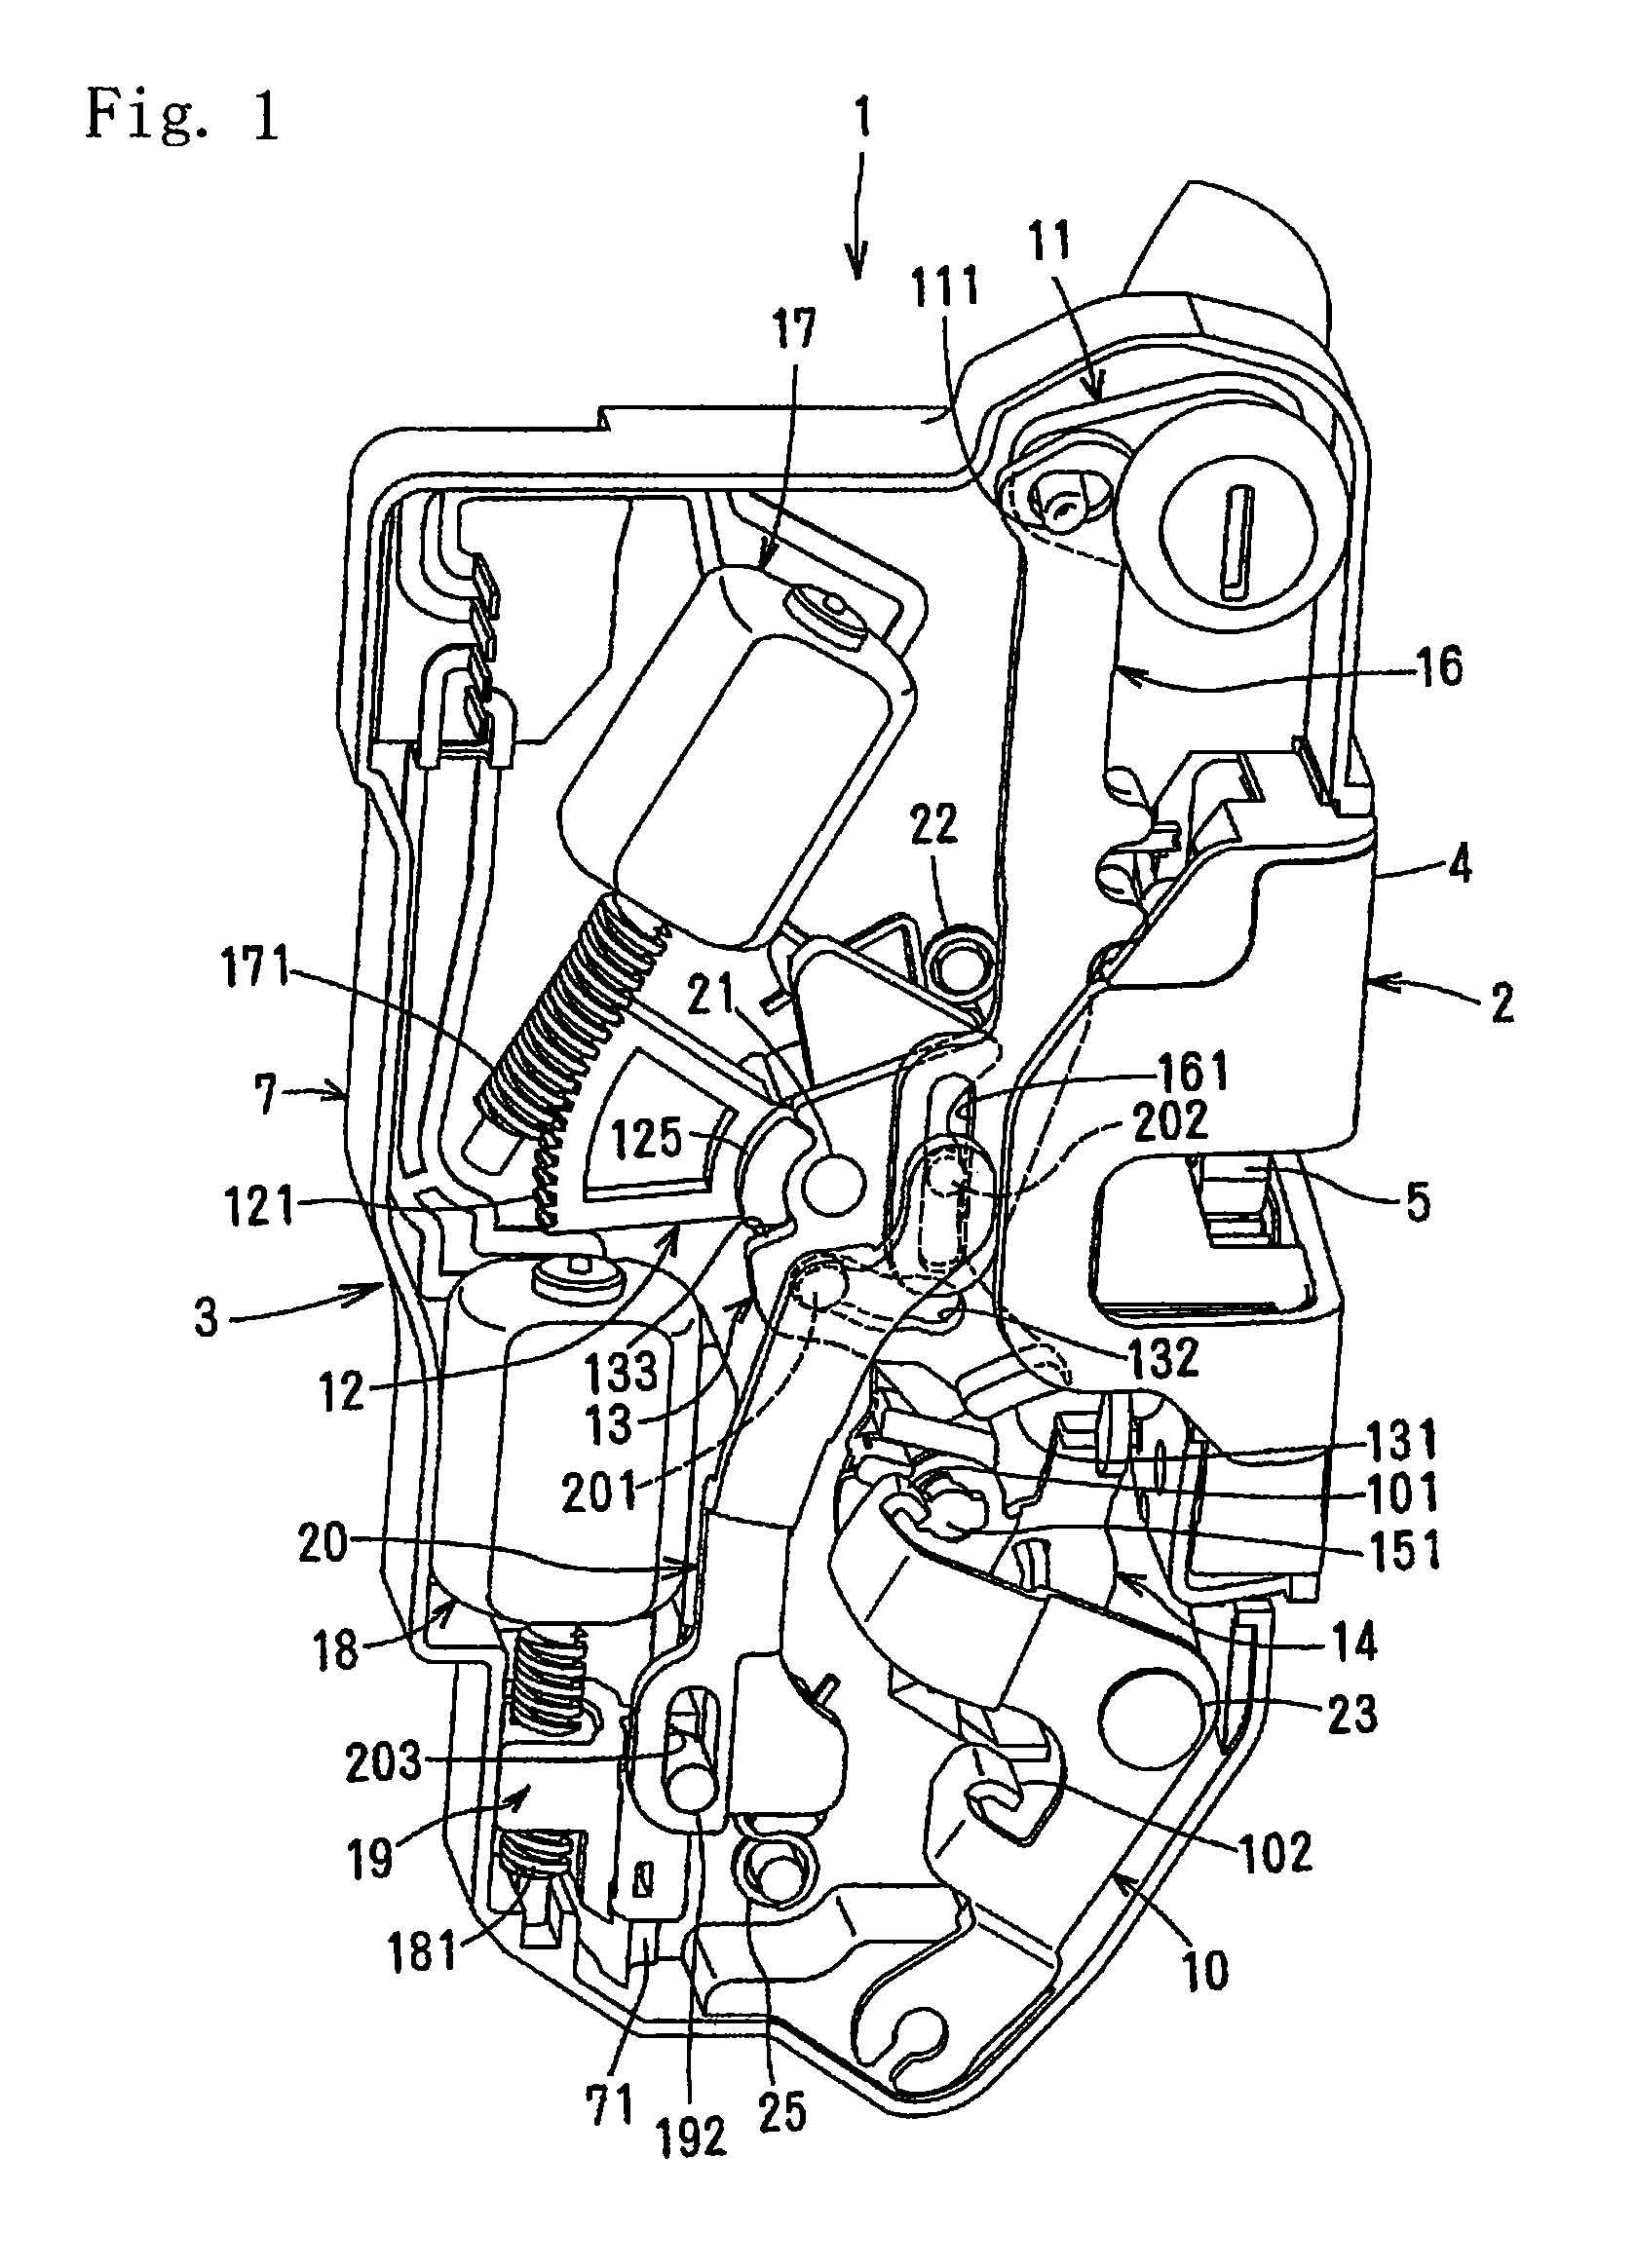 Door latch device for a motor vehicle